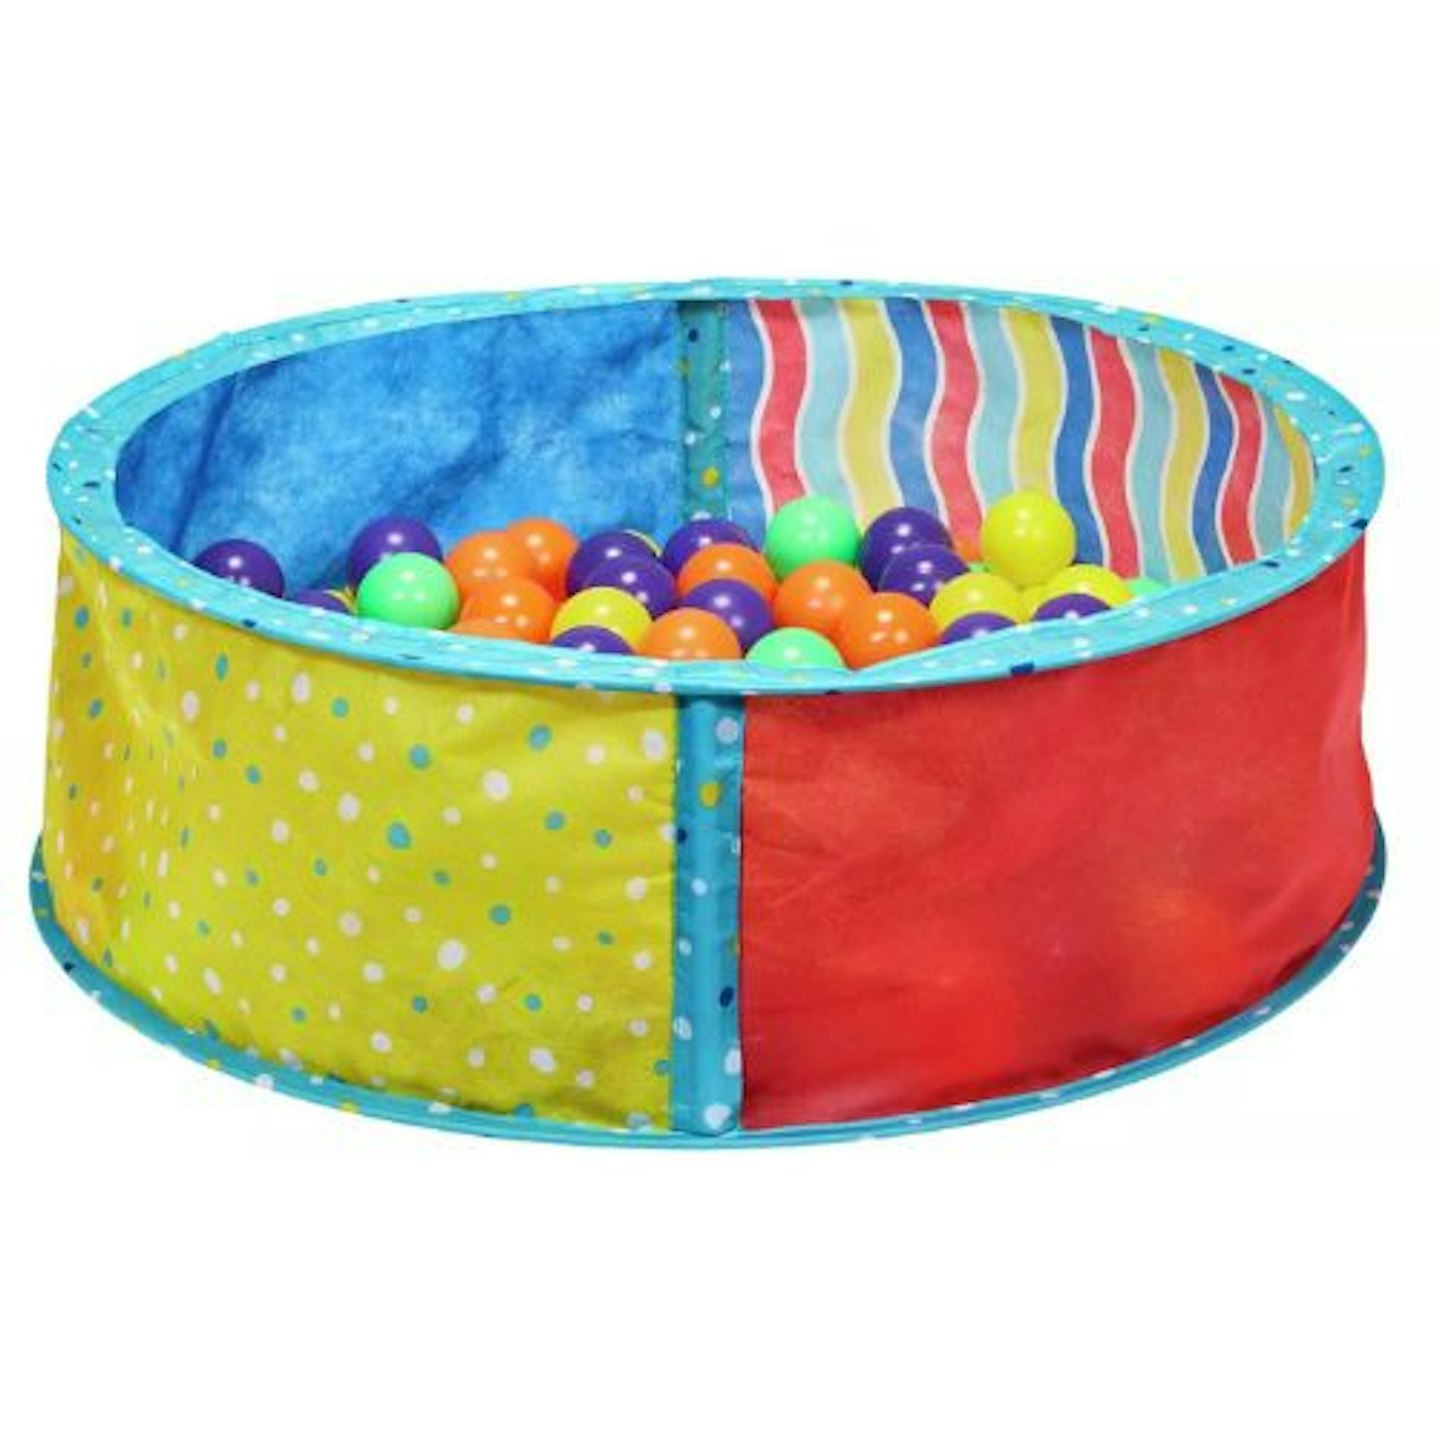 Chad Valley Indoor Ball Pit Activity Toy